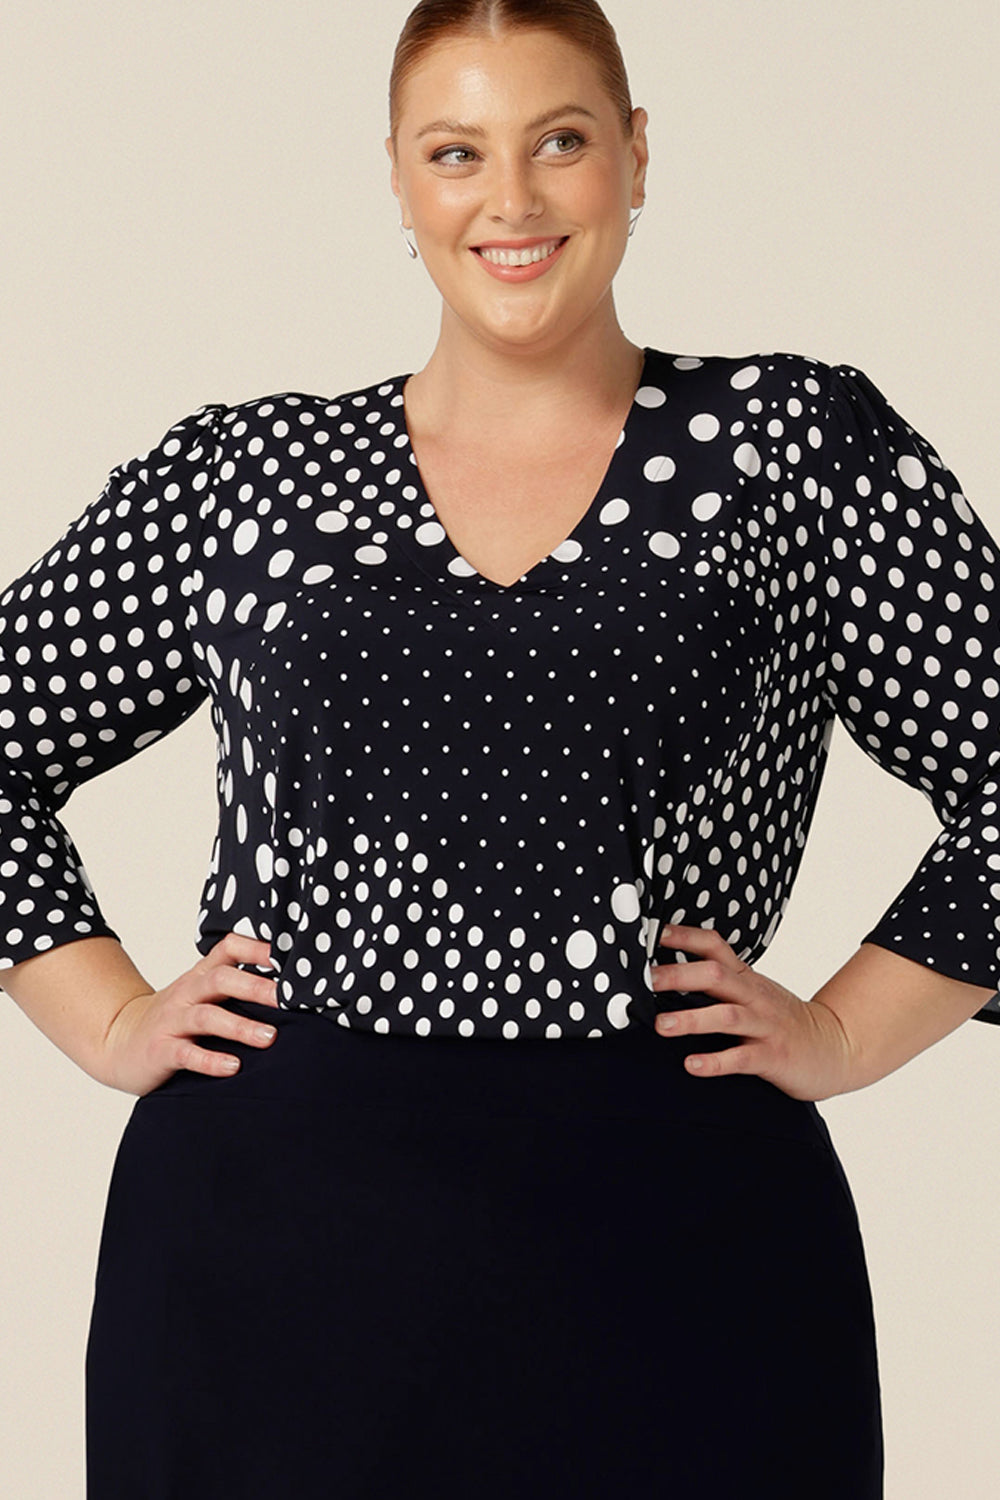 A chic top for plus size and fuller figure women, this V-neck top with fluted 3/4 sleeves comes in a navy and white spot print.